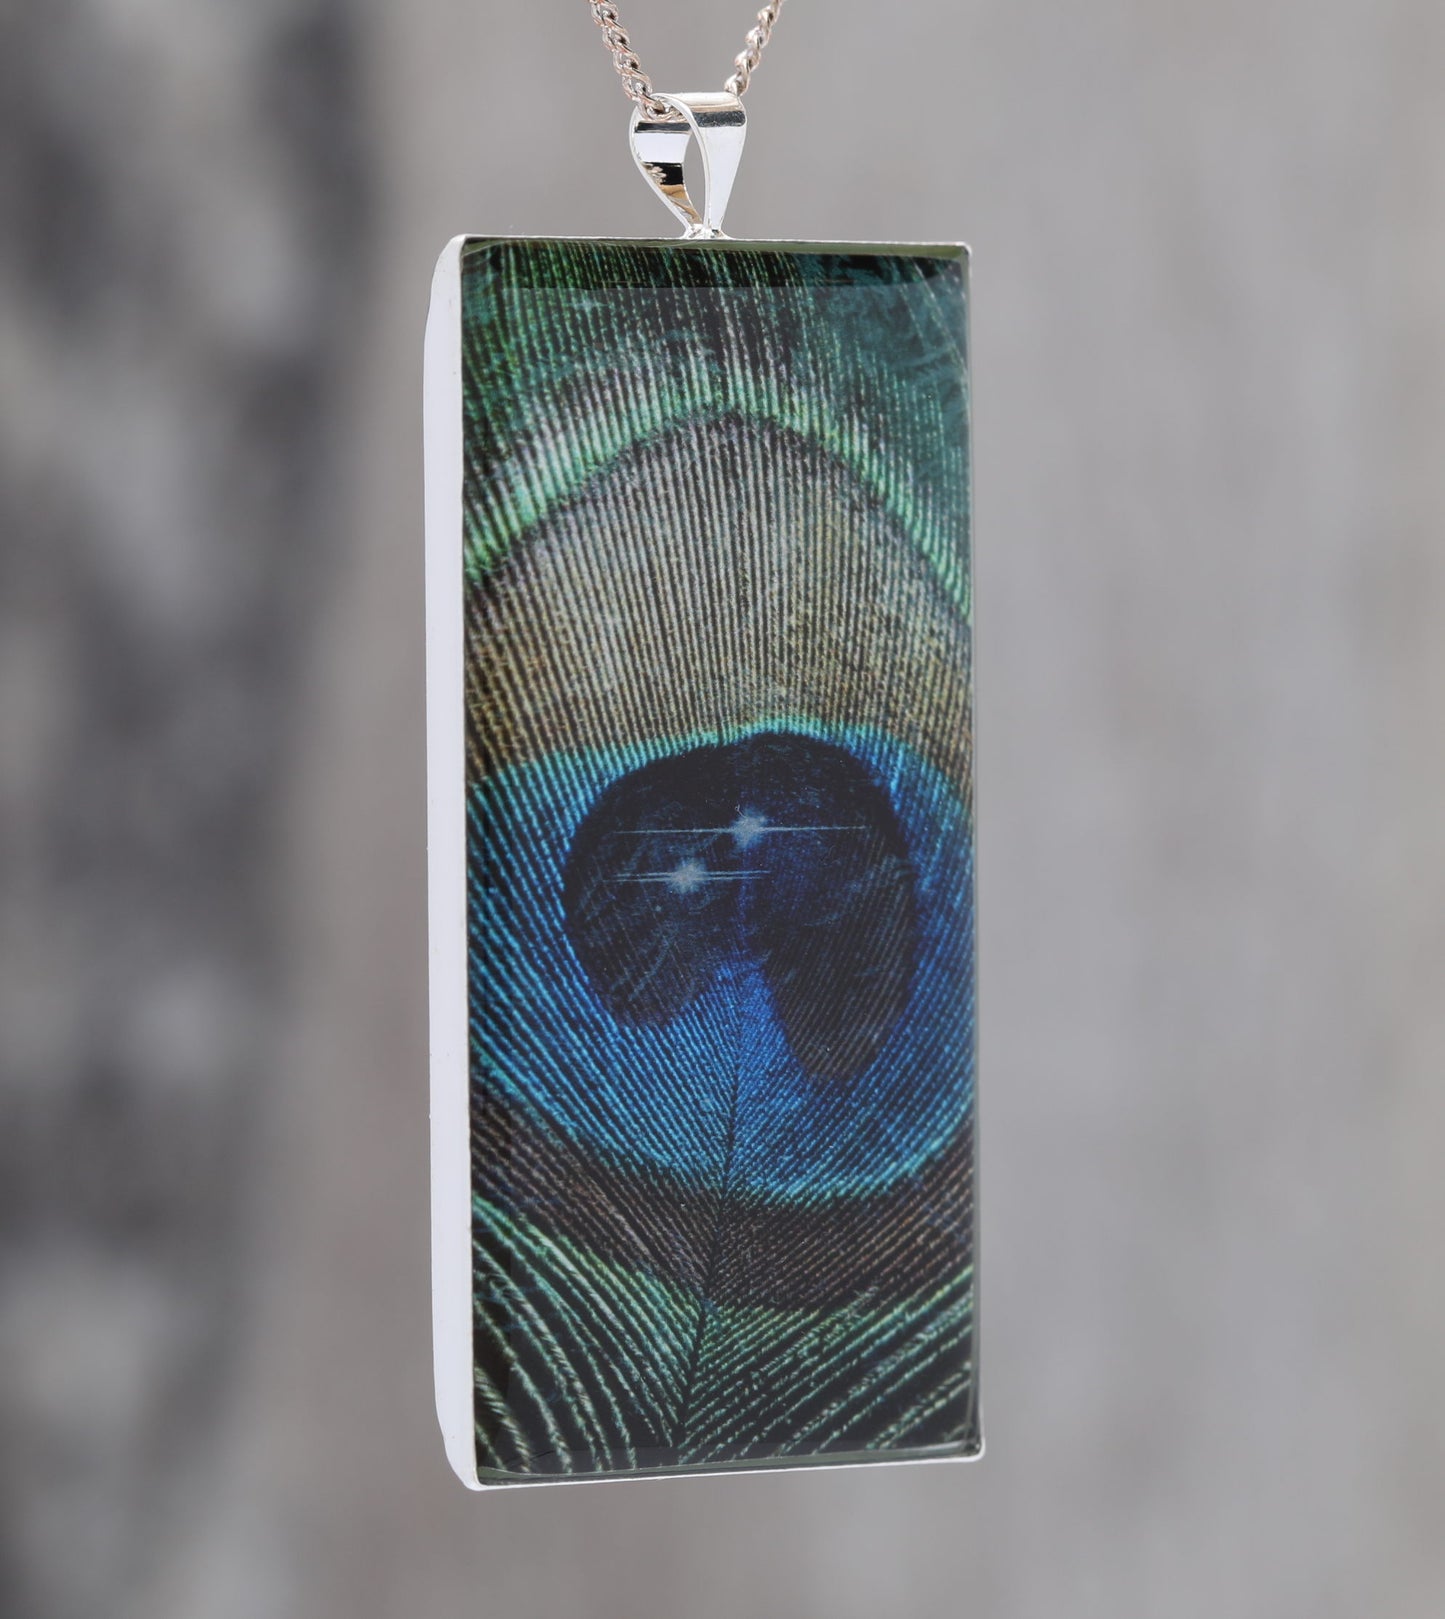 Feathers in Space  - Glow-in-the-dark pendant with a beautiful Peacock feather and star pattern